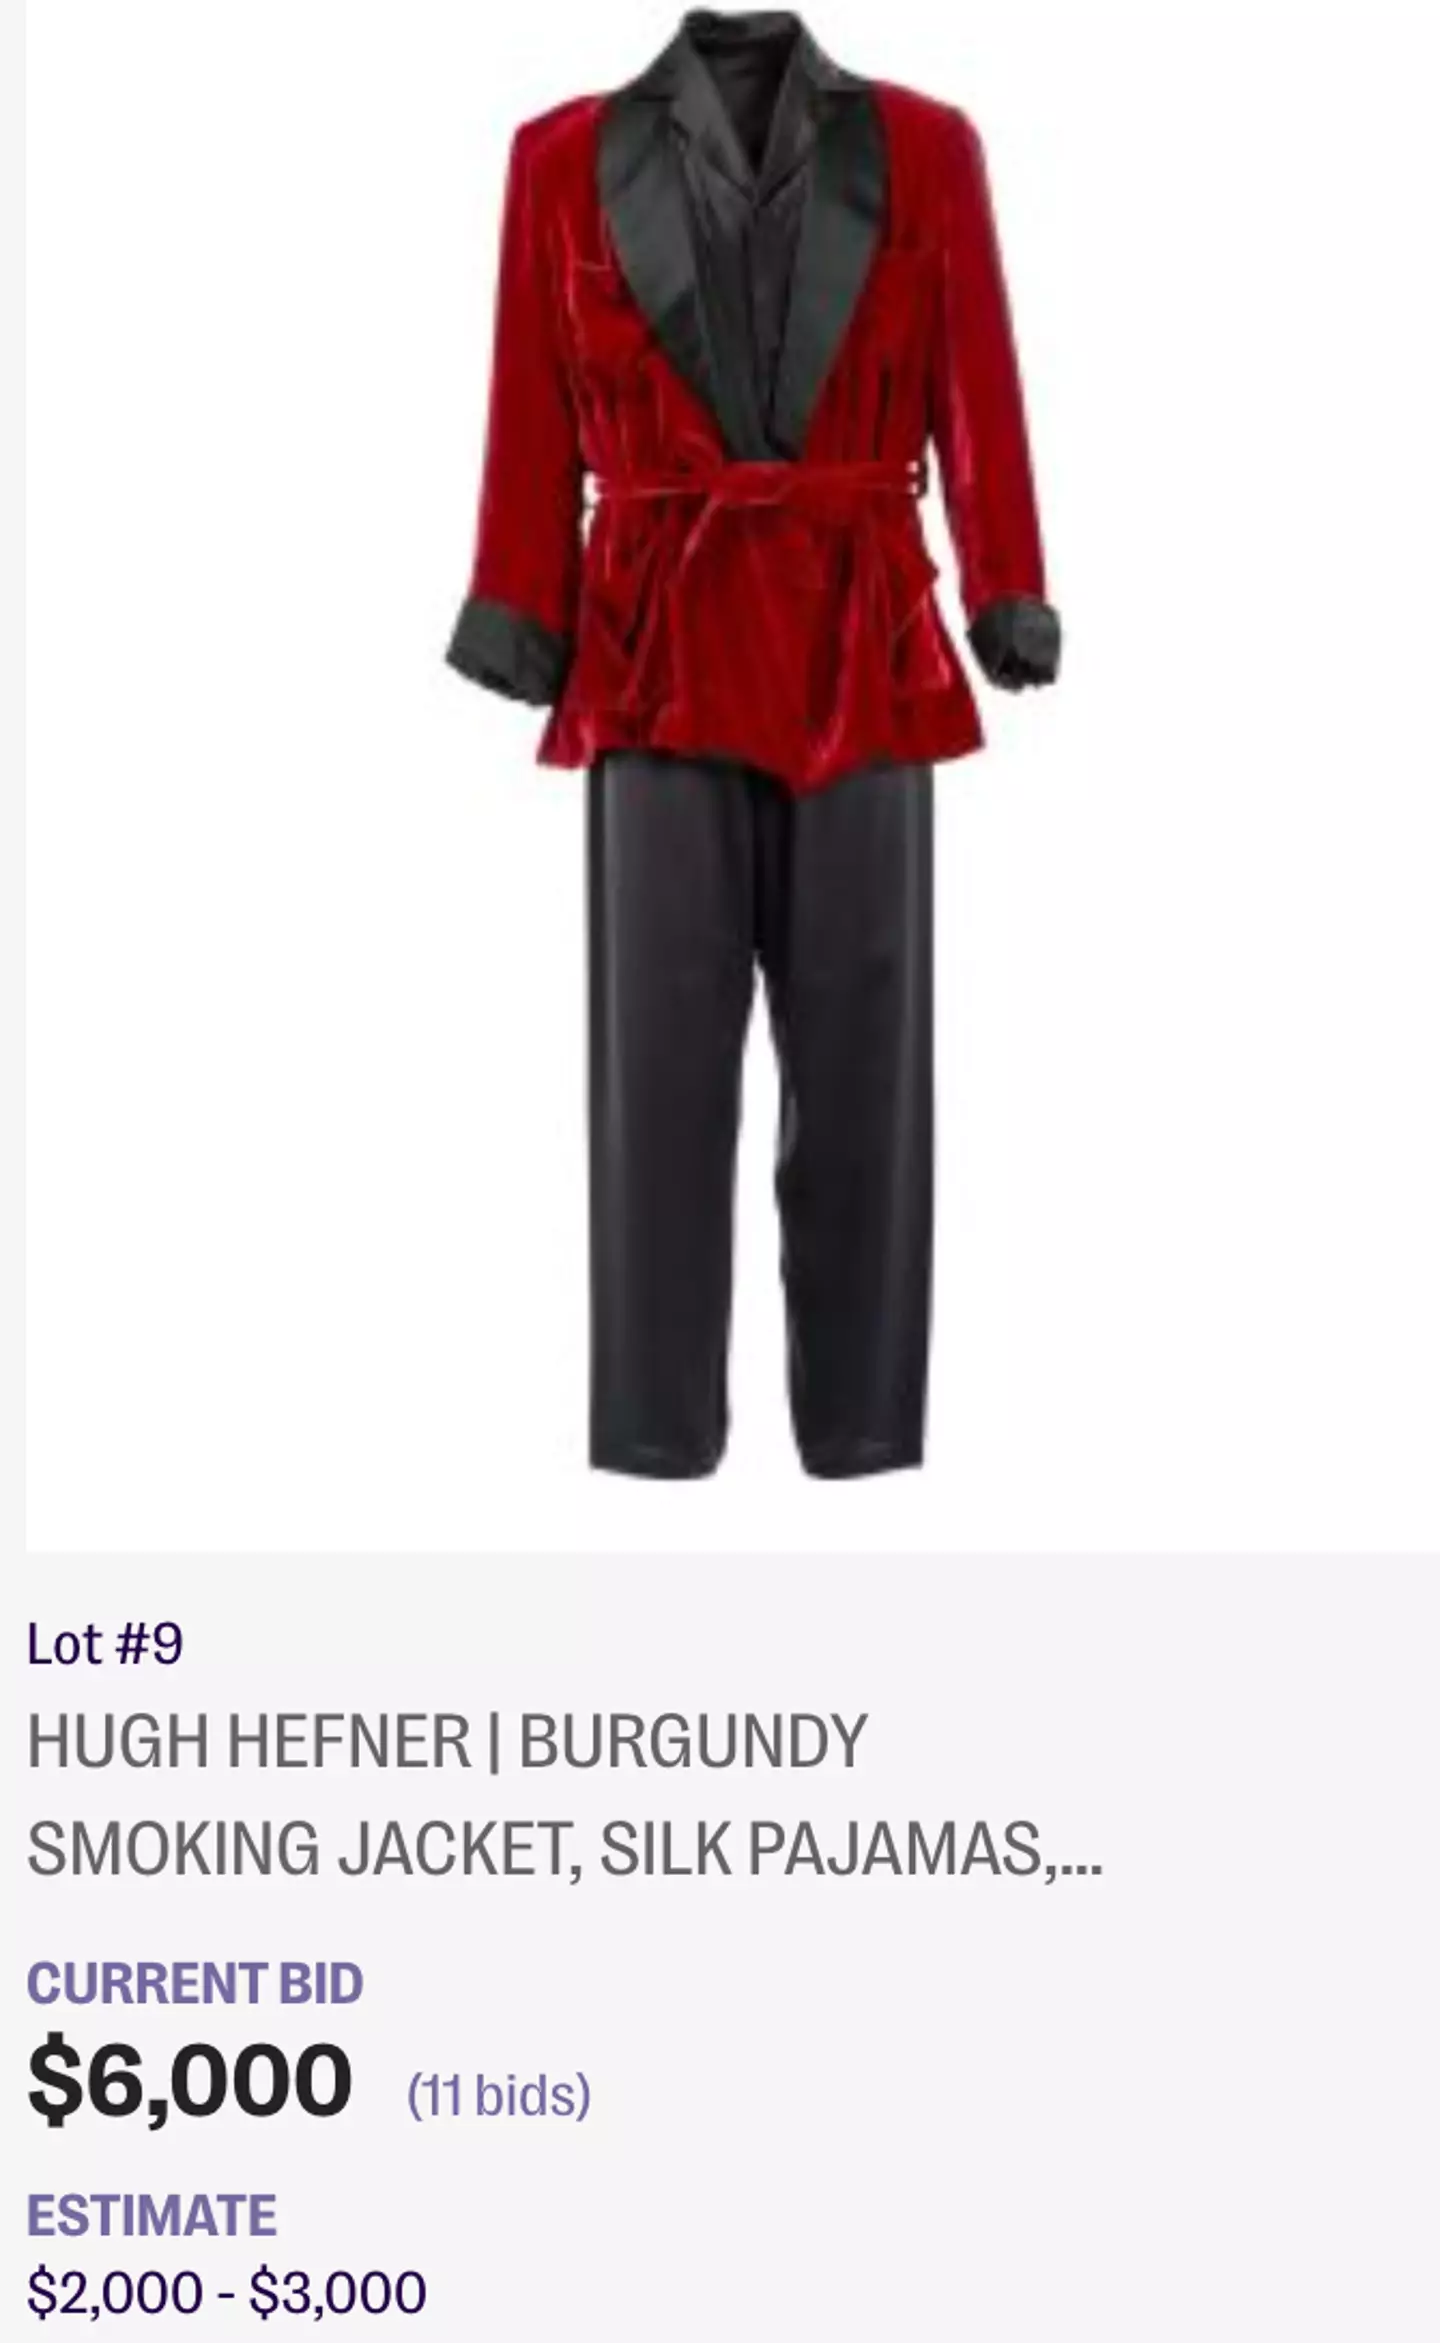 Some of Hugh Hefner's outfits are on sale.